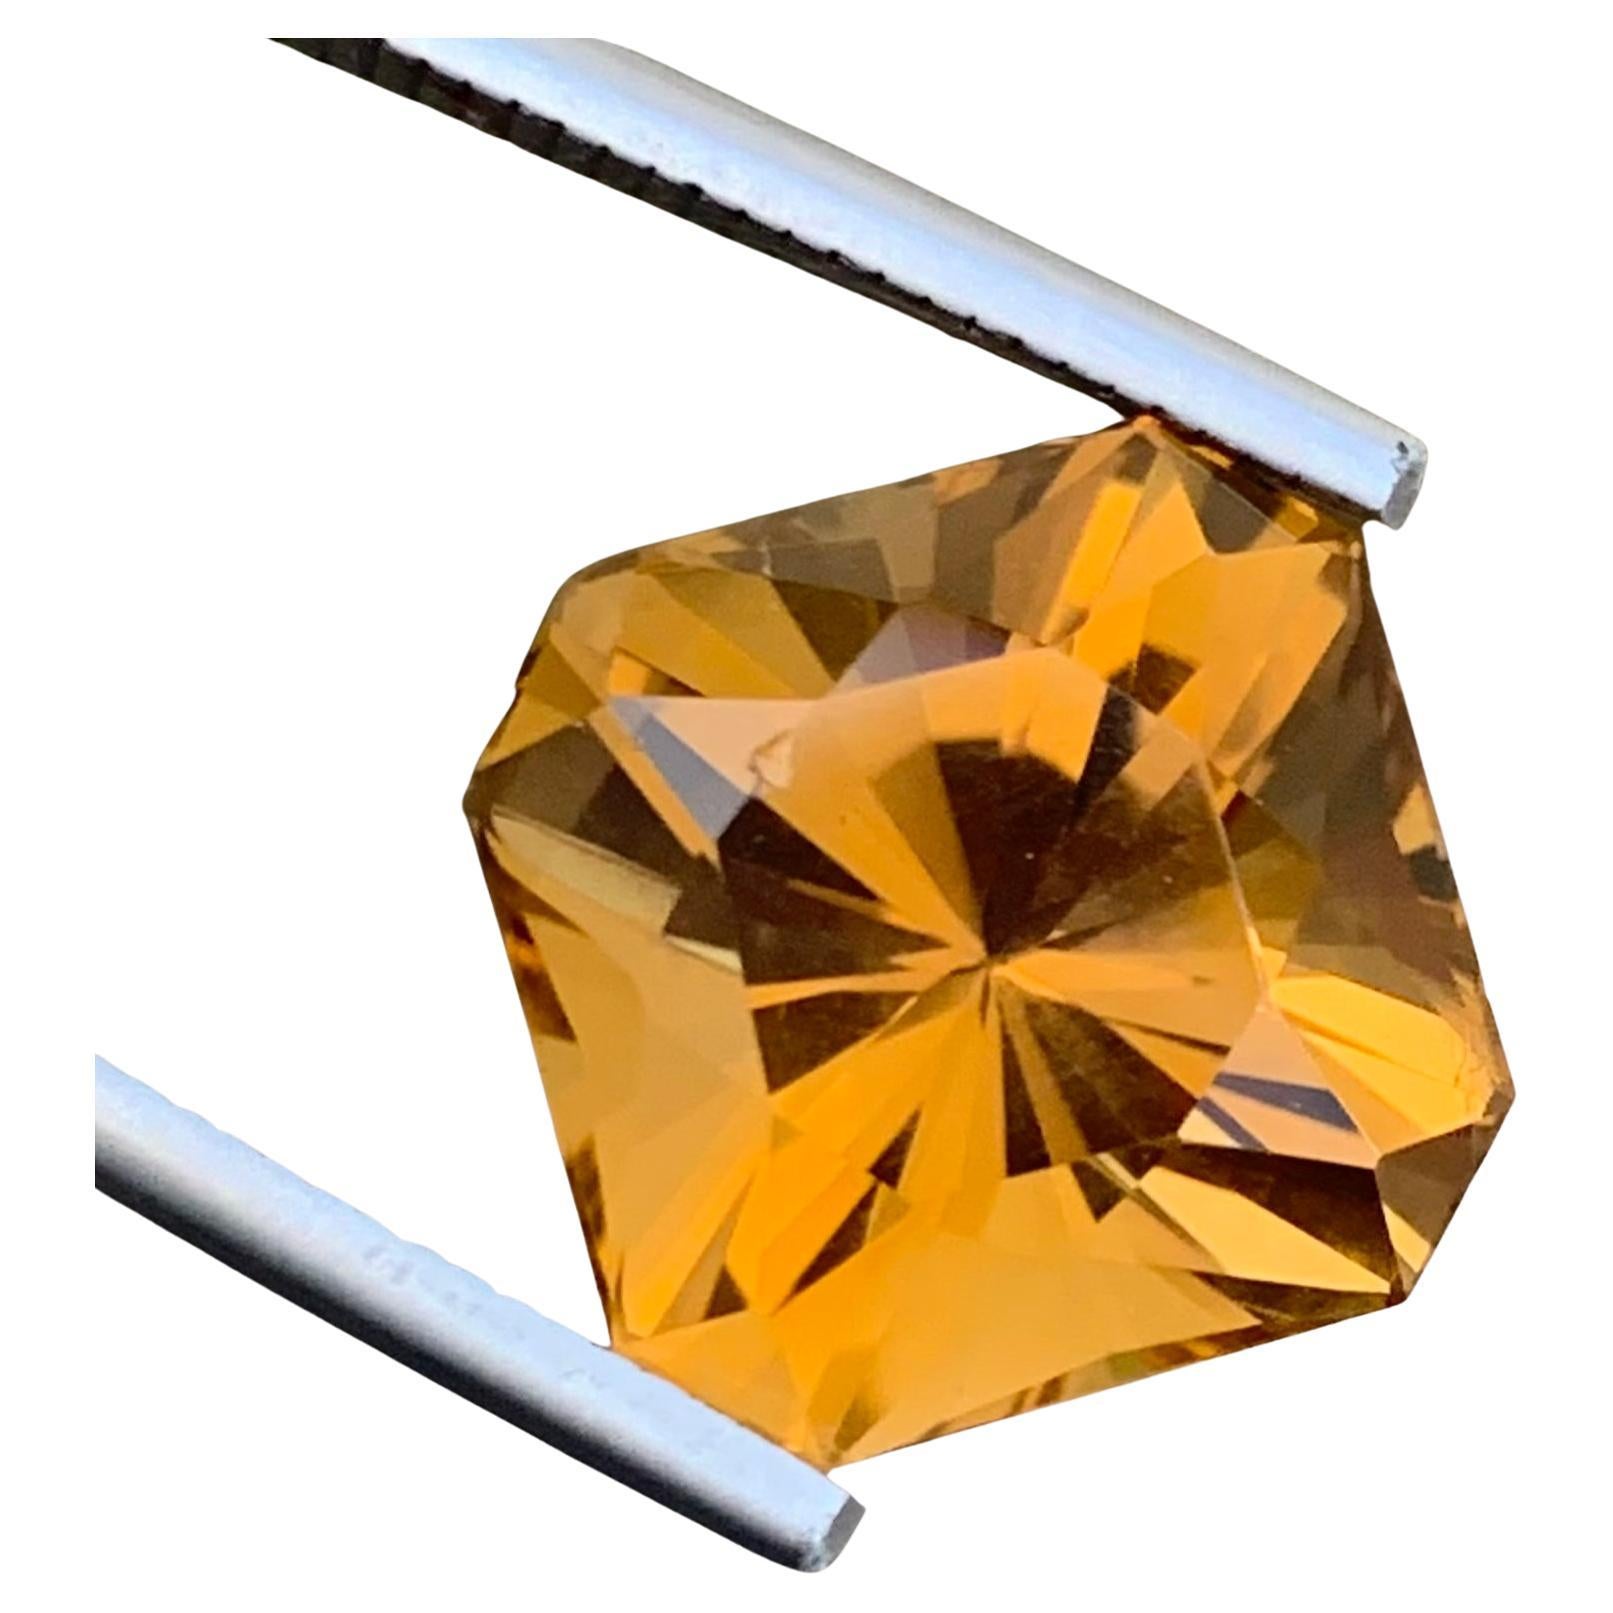 10.60 Carats Natural Loose Fancy Cut Citrine Gemstone From Brazil Mine For Sale